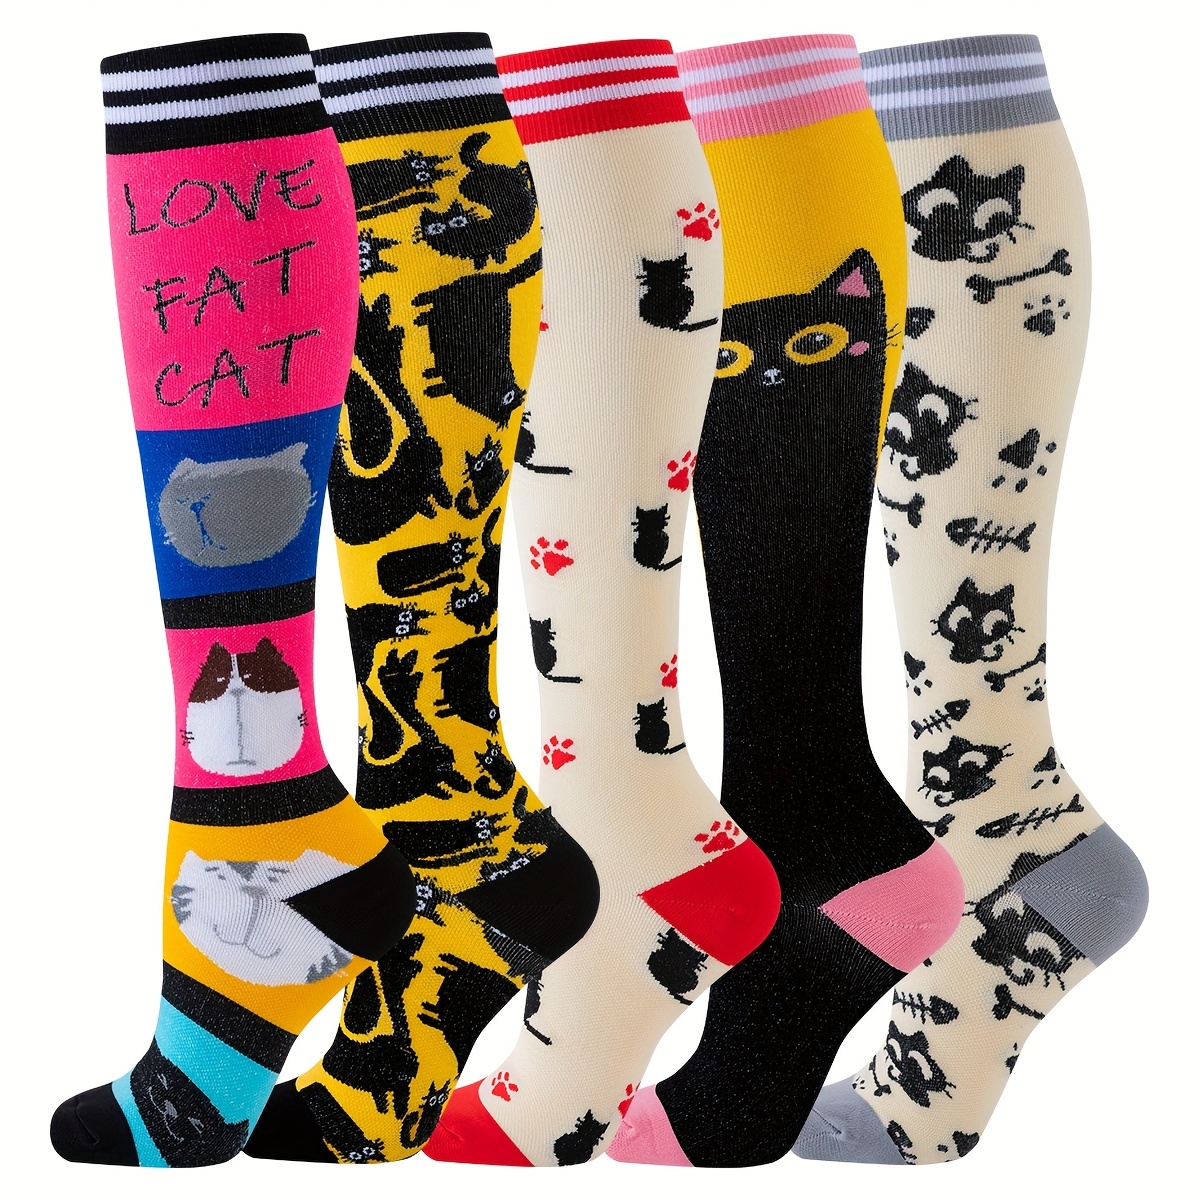 

5pairs Cat Pattern Men's Over The Calf Stockings Breathable Comfy Socks Casual Socks Sports Workout Compression Socks For Outdoor Fitness Exercises Basketball Football Running Hiking